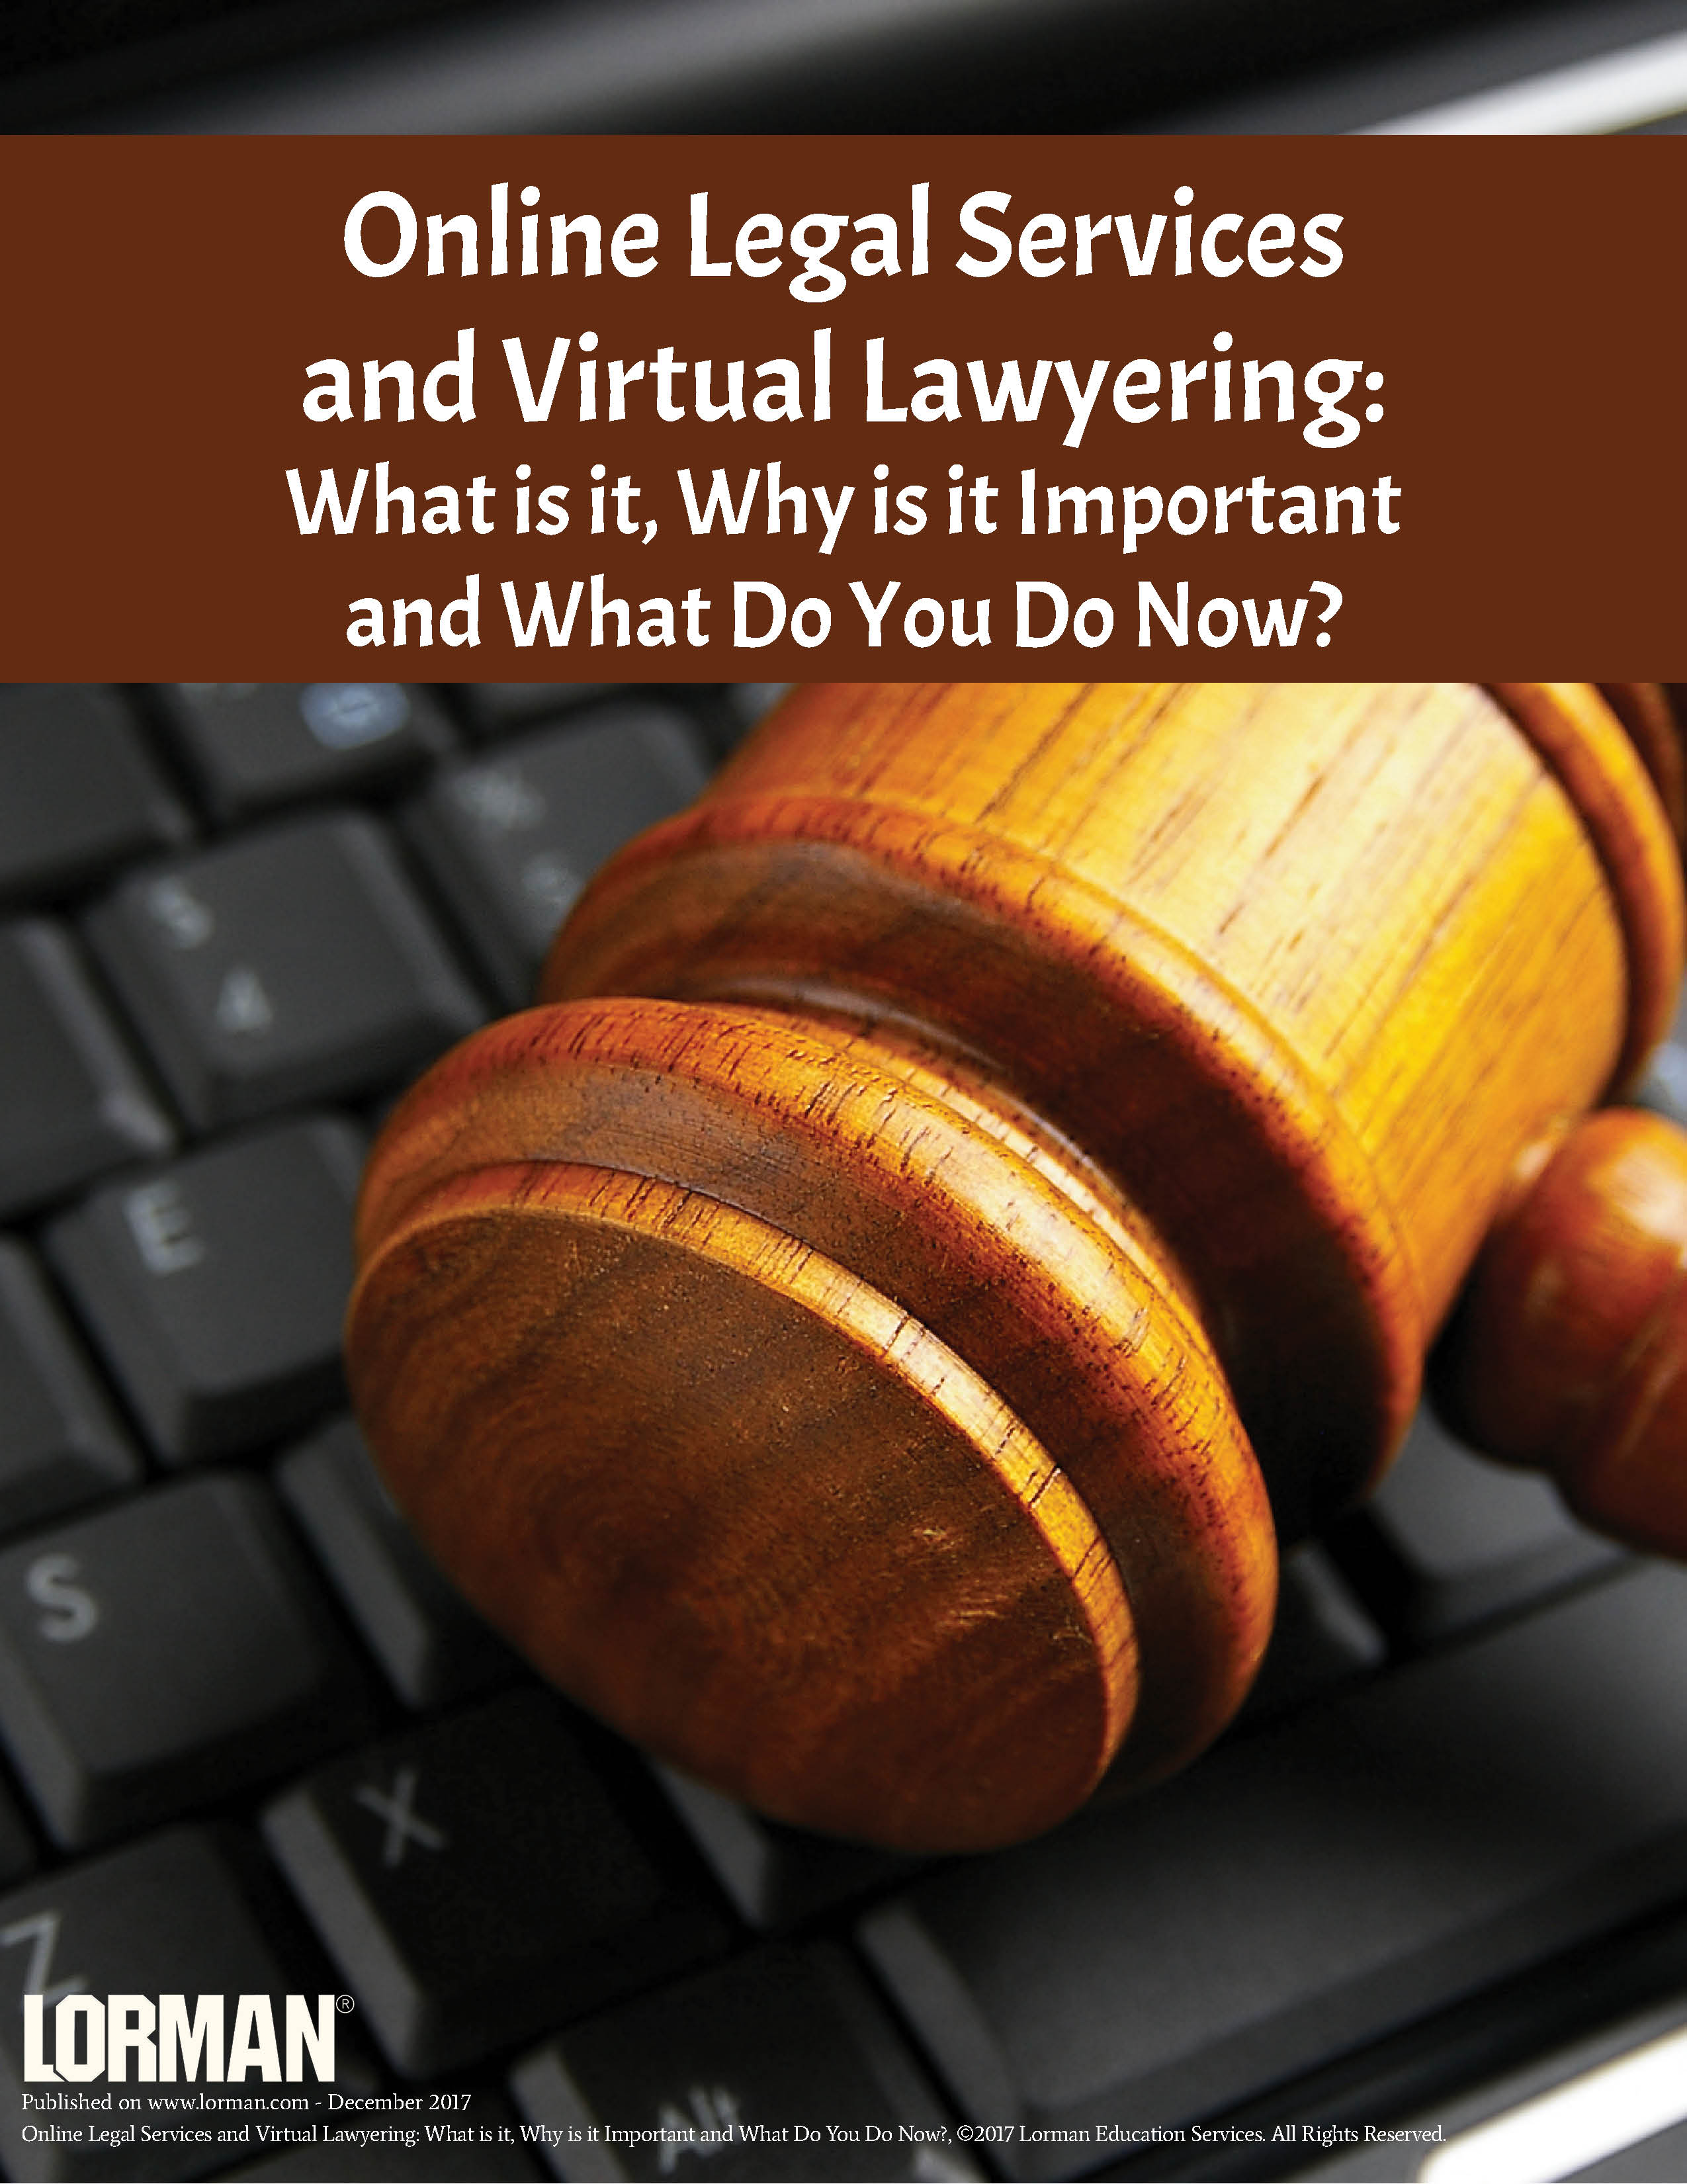 Online Legal Services and Virtual Lawyering: What is it, Why is it Important and What Do You Do Now